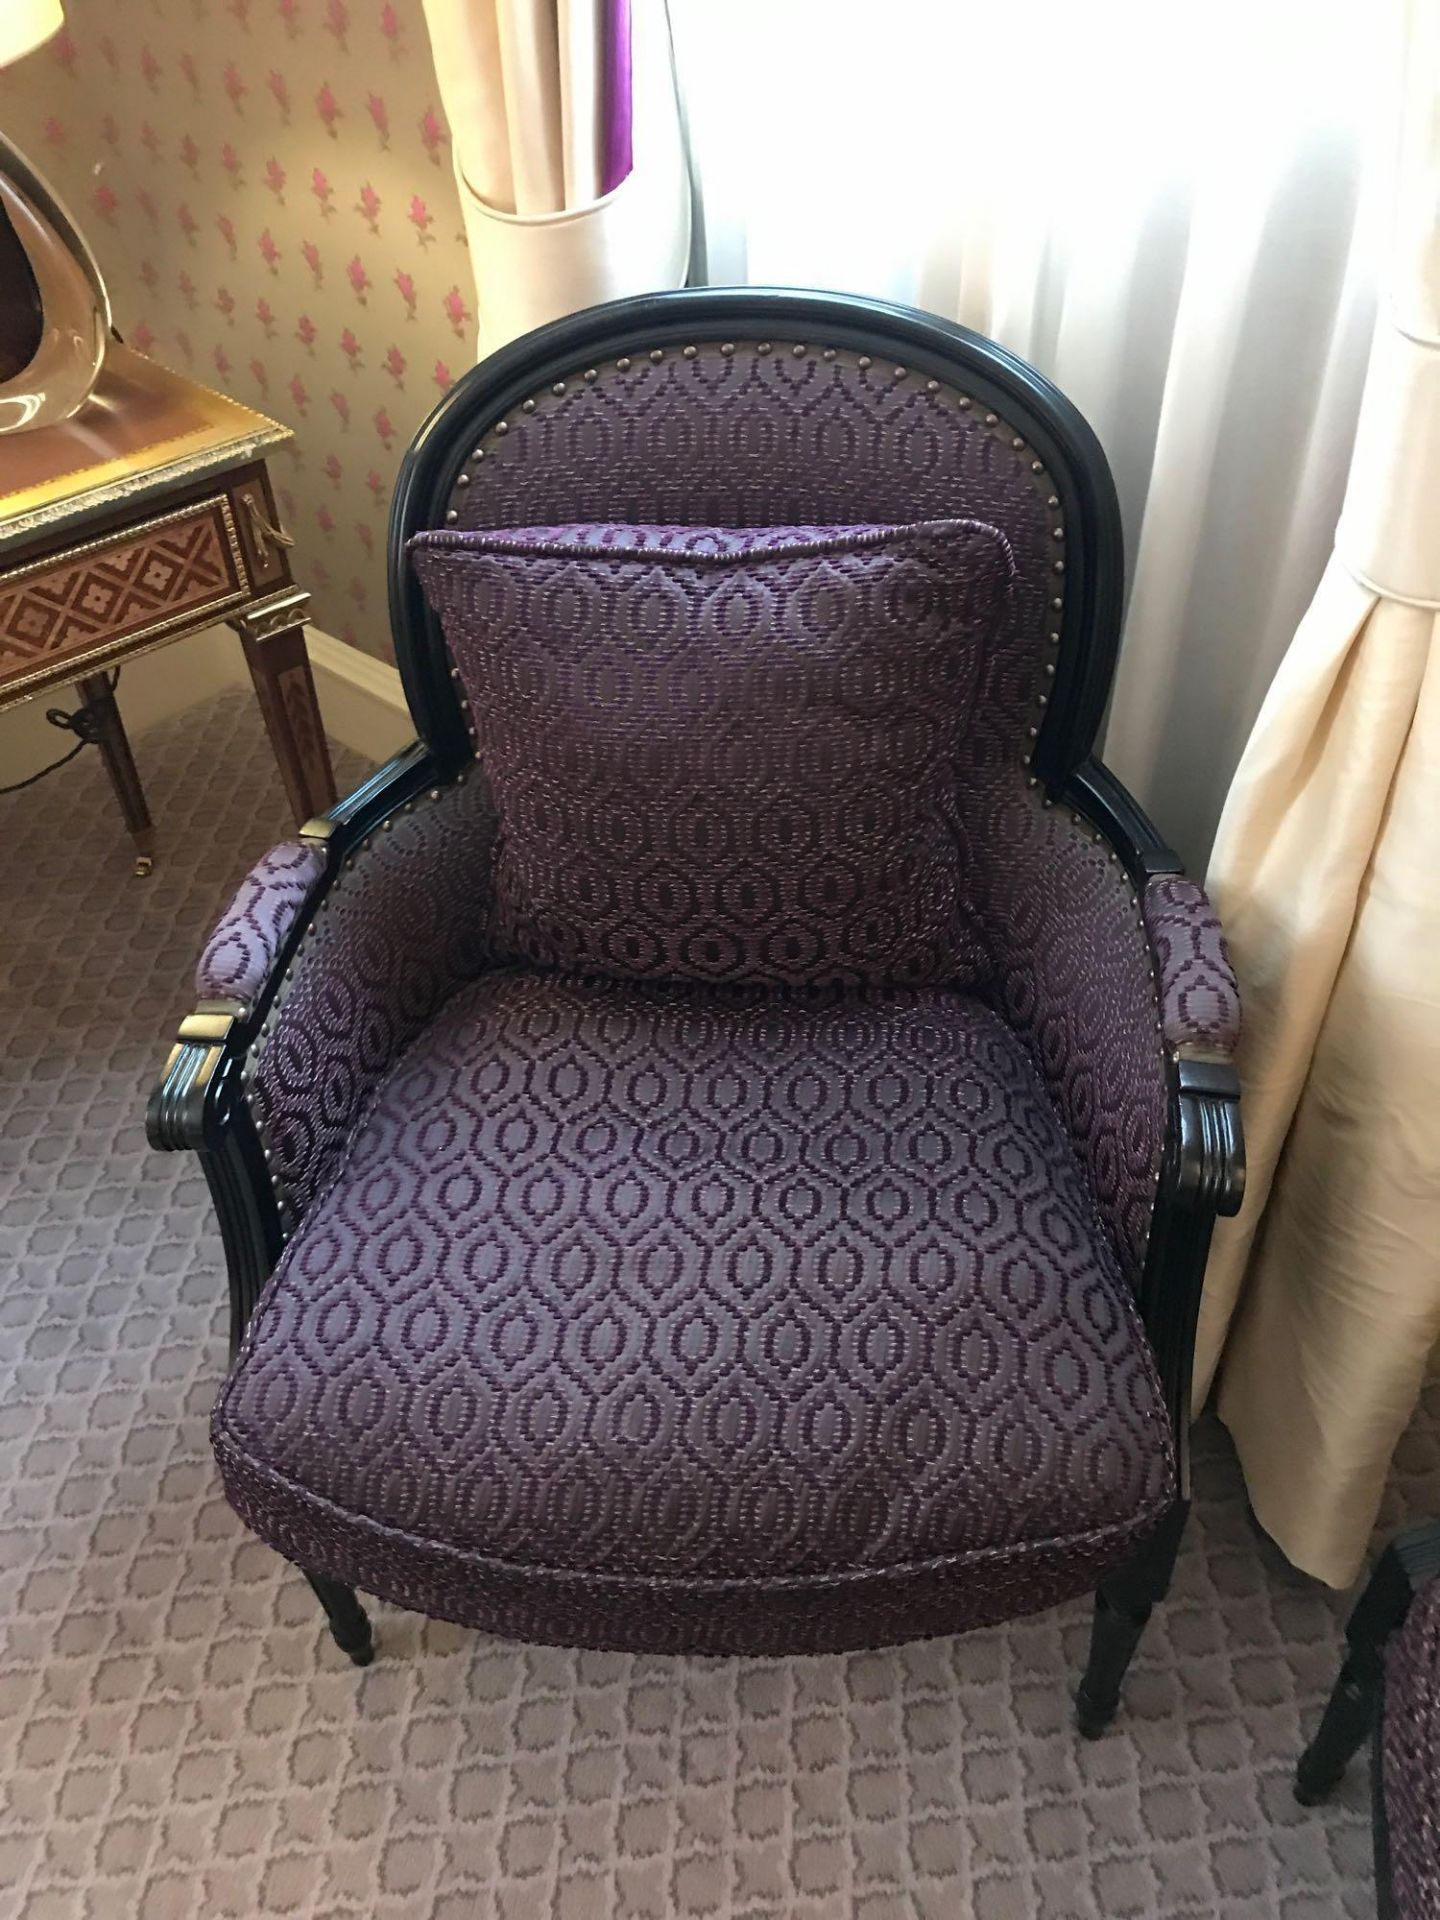 A Pair Of Bergere Chairs Black Wood Frame Upholstered In A Dark Mauve Pattern With Stud Pin Detail - Image 2 of 2